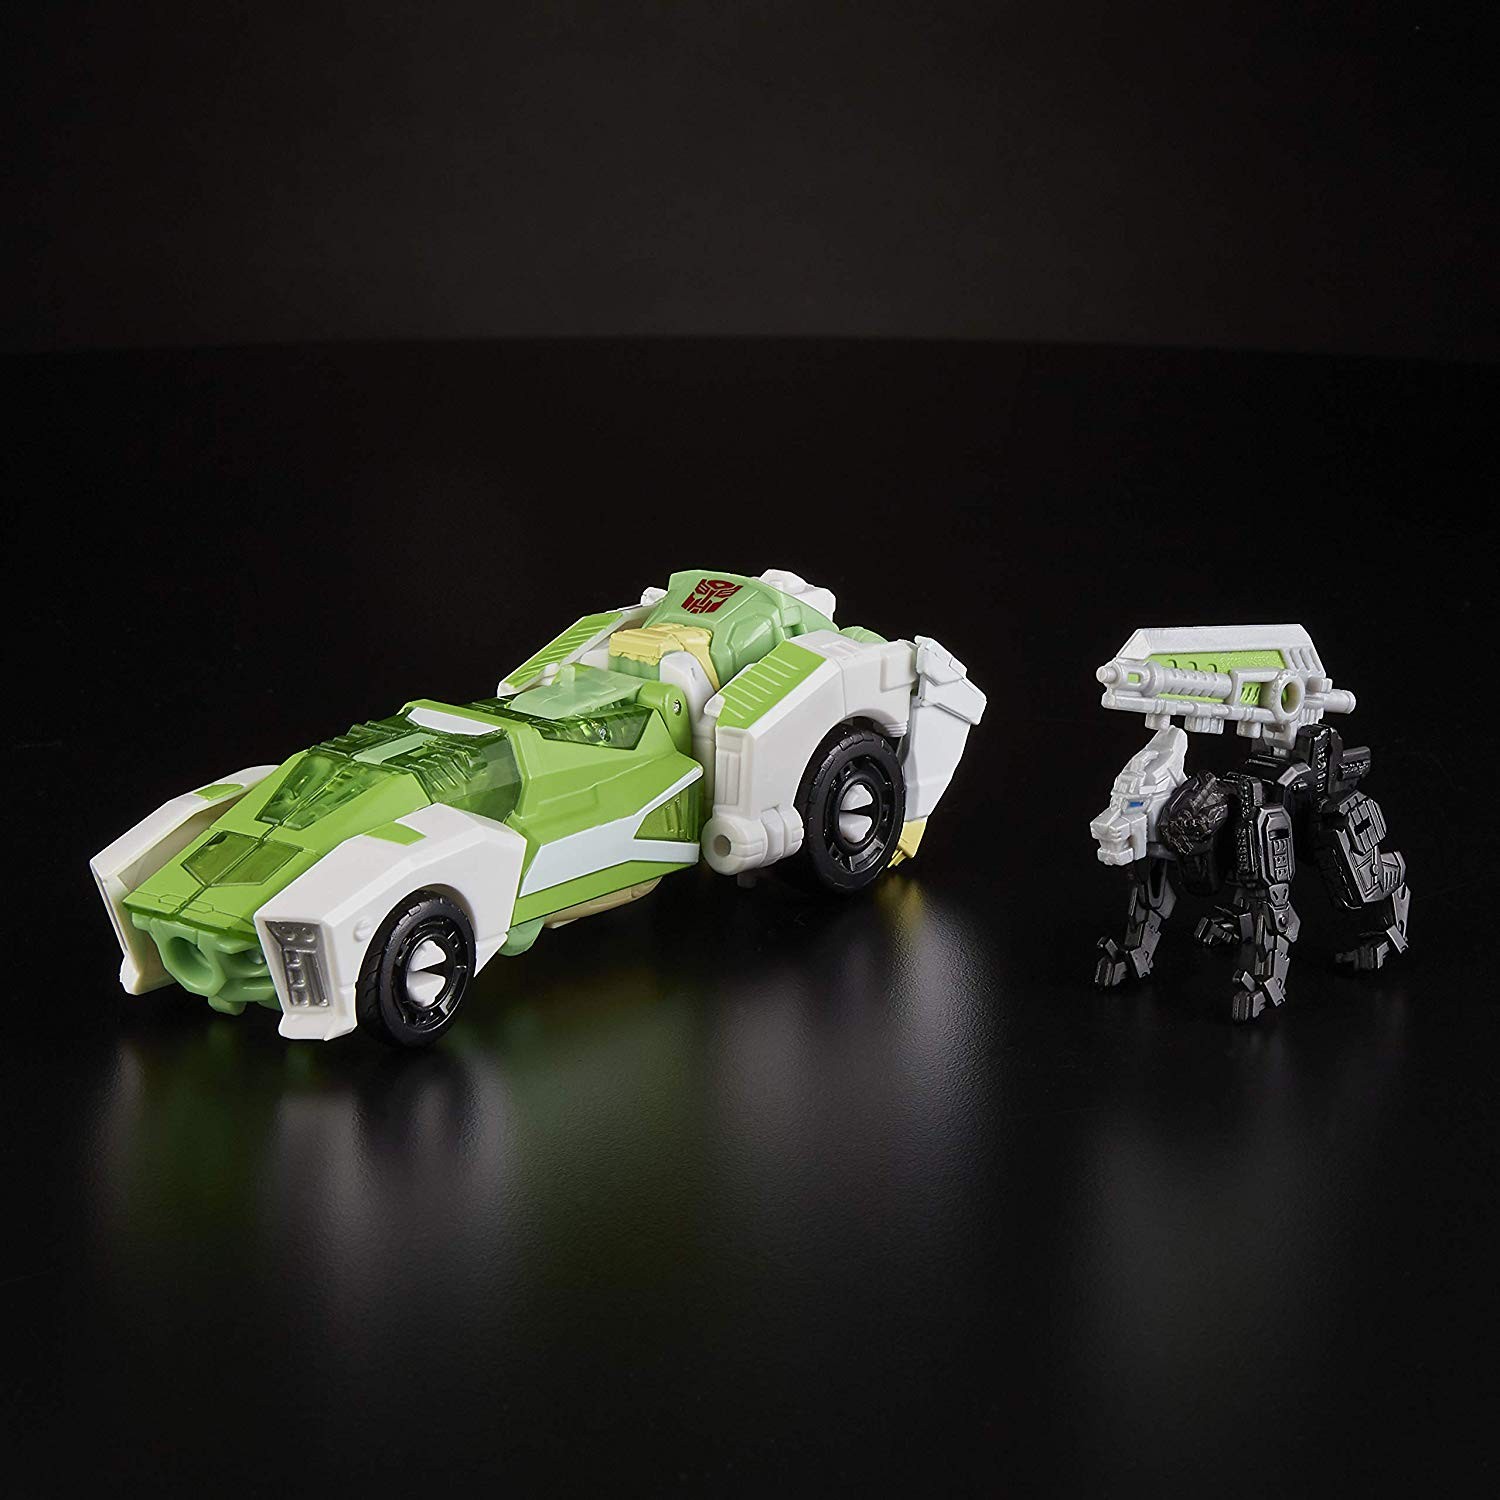 Transformers News: SIEGE Greenlight with Dazzlestrike now available on Amazon.com